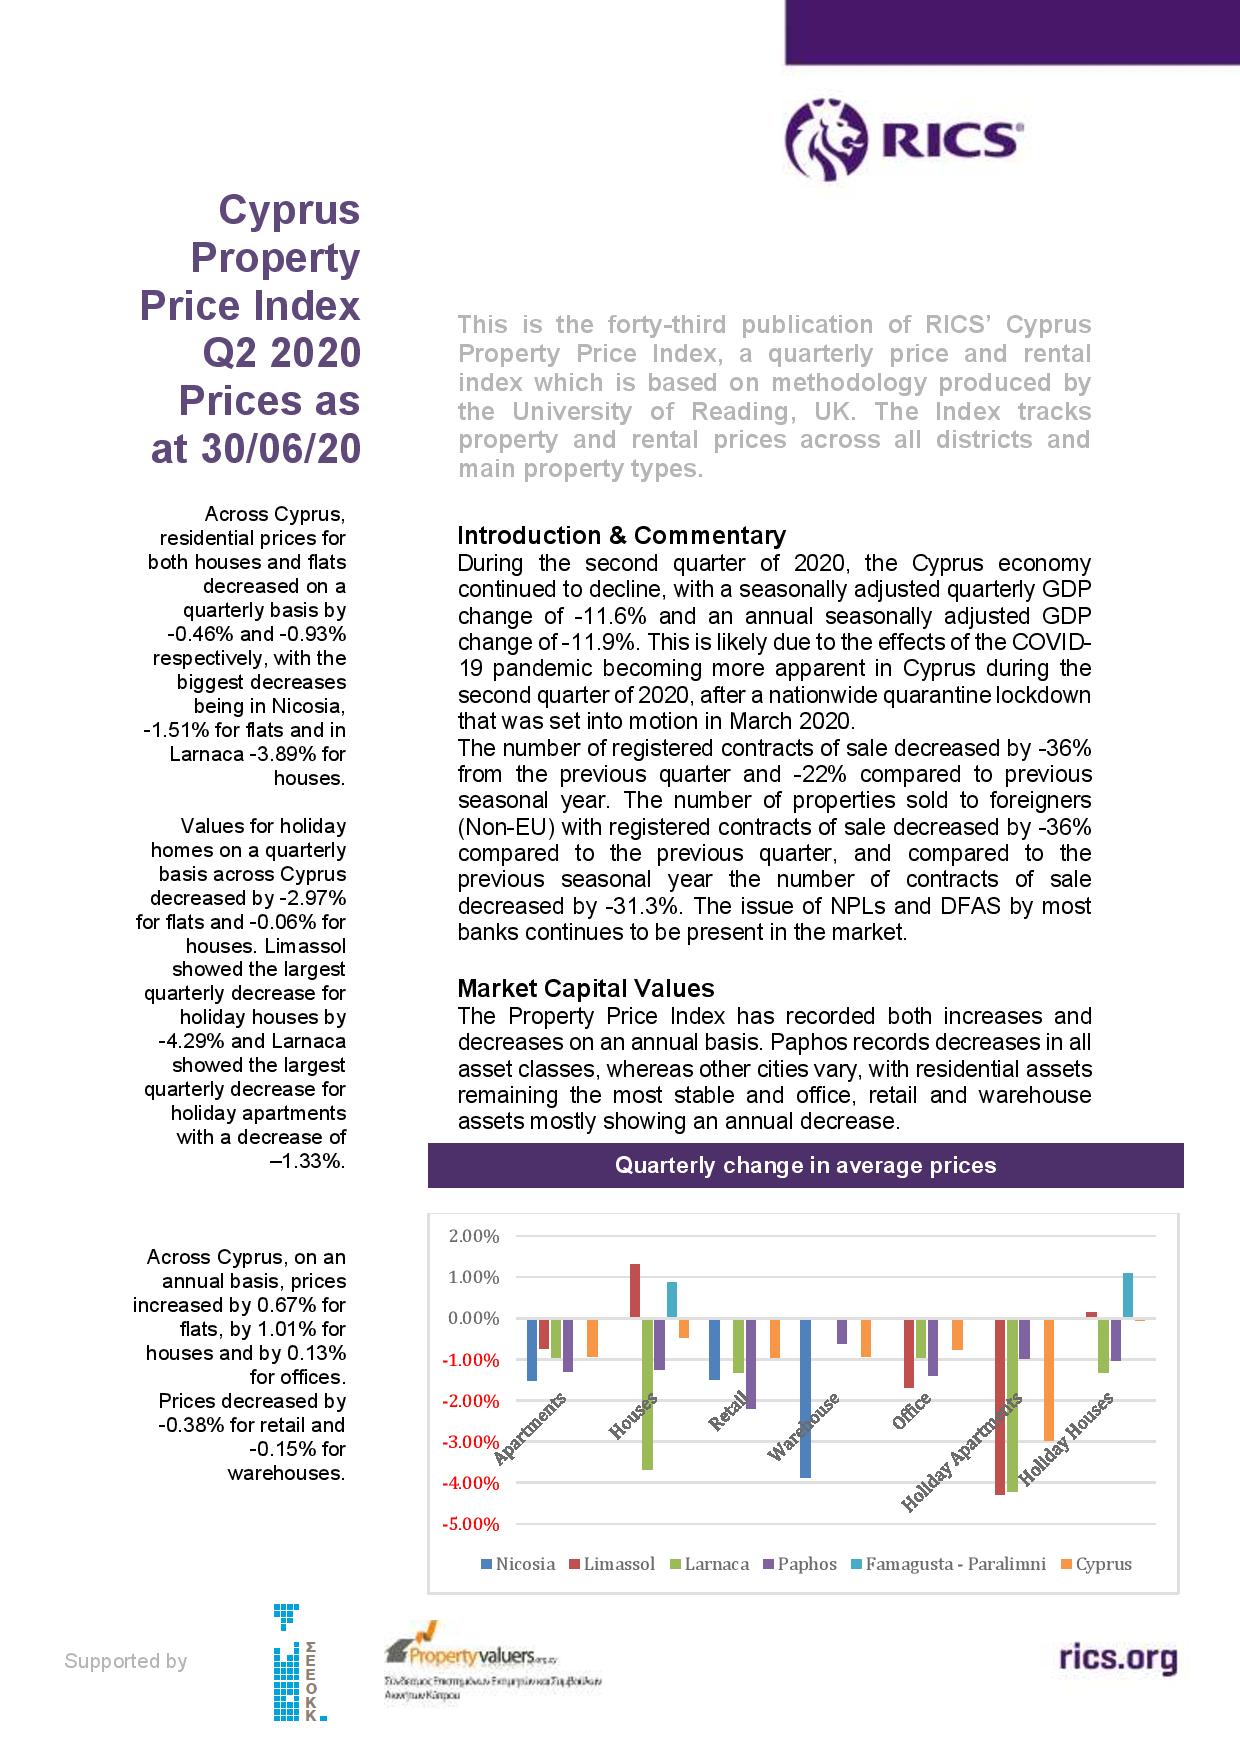 RICS: Cyprus Property Price Index Q2 2020 Prices as at 30/06/20